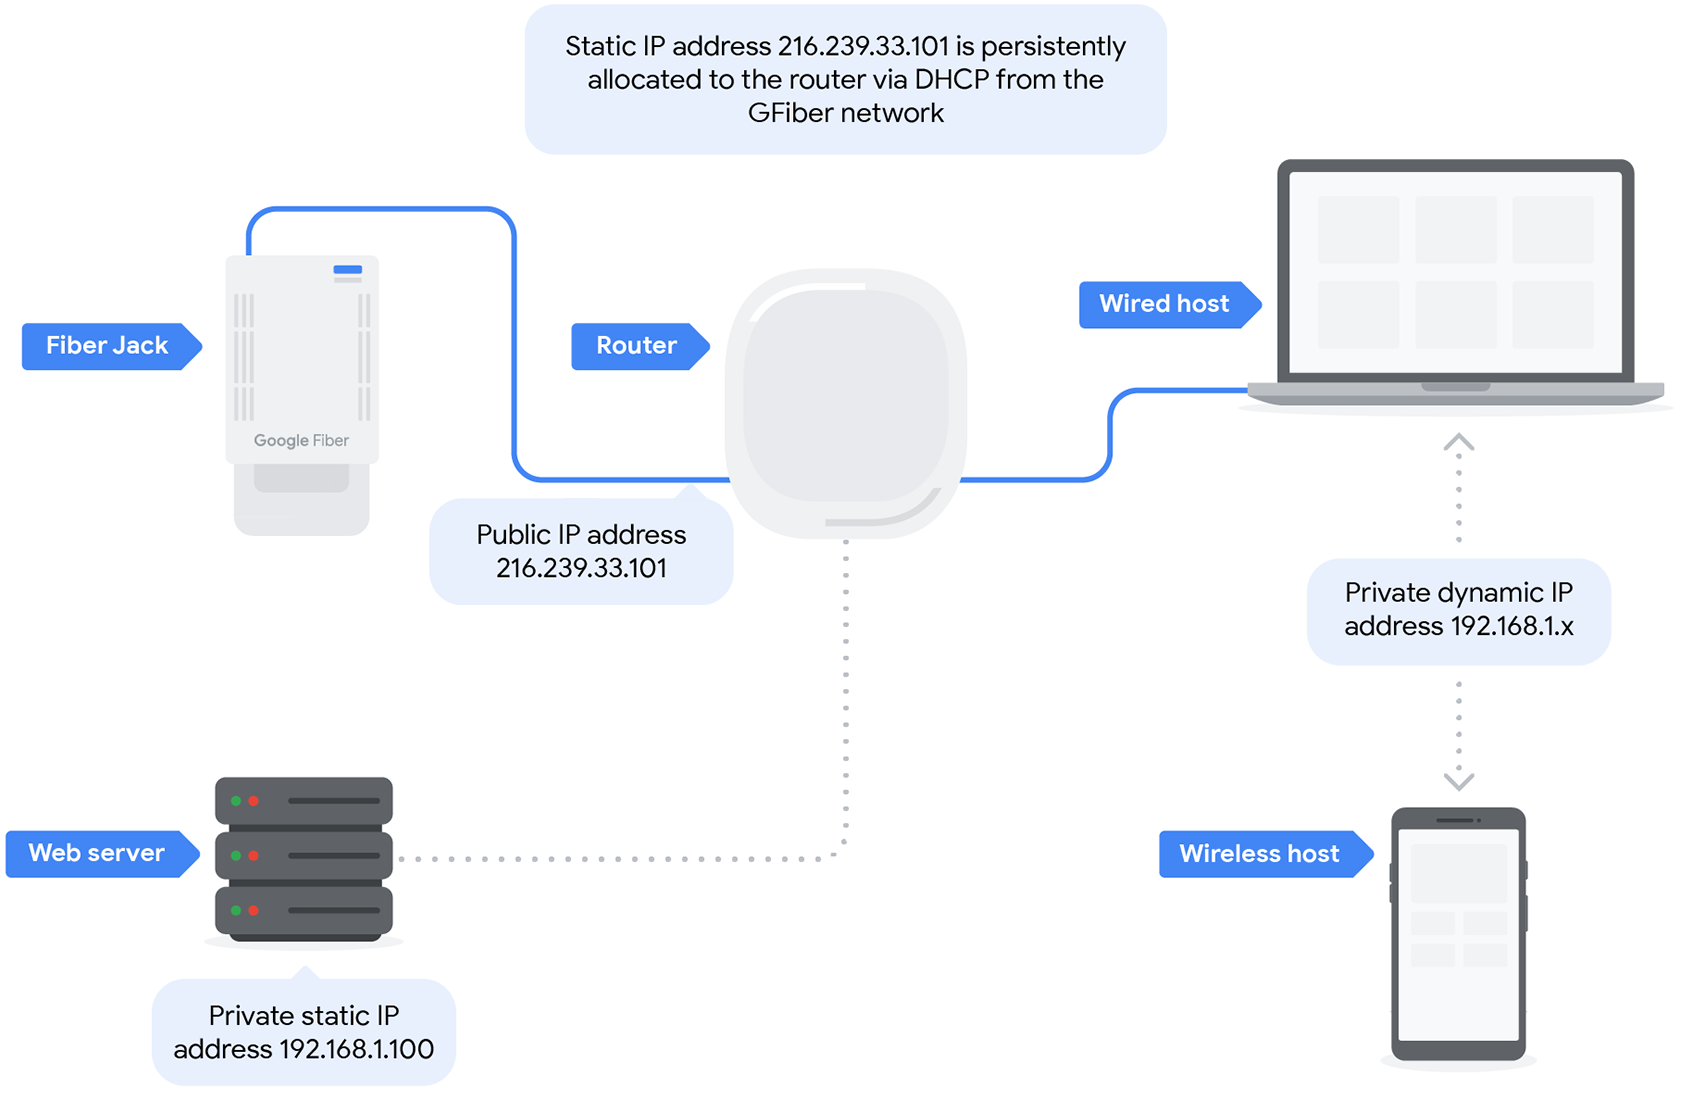 Diagram of a business IP configuration. The Fiber Jack allocates public IP address 216.239.33.101 via DHCP to the router. Connected to the router is a wired and wireless host with private dynamic IP addresses 192.168.1.x, and a web server with private static IP address 192.168.1.100.